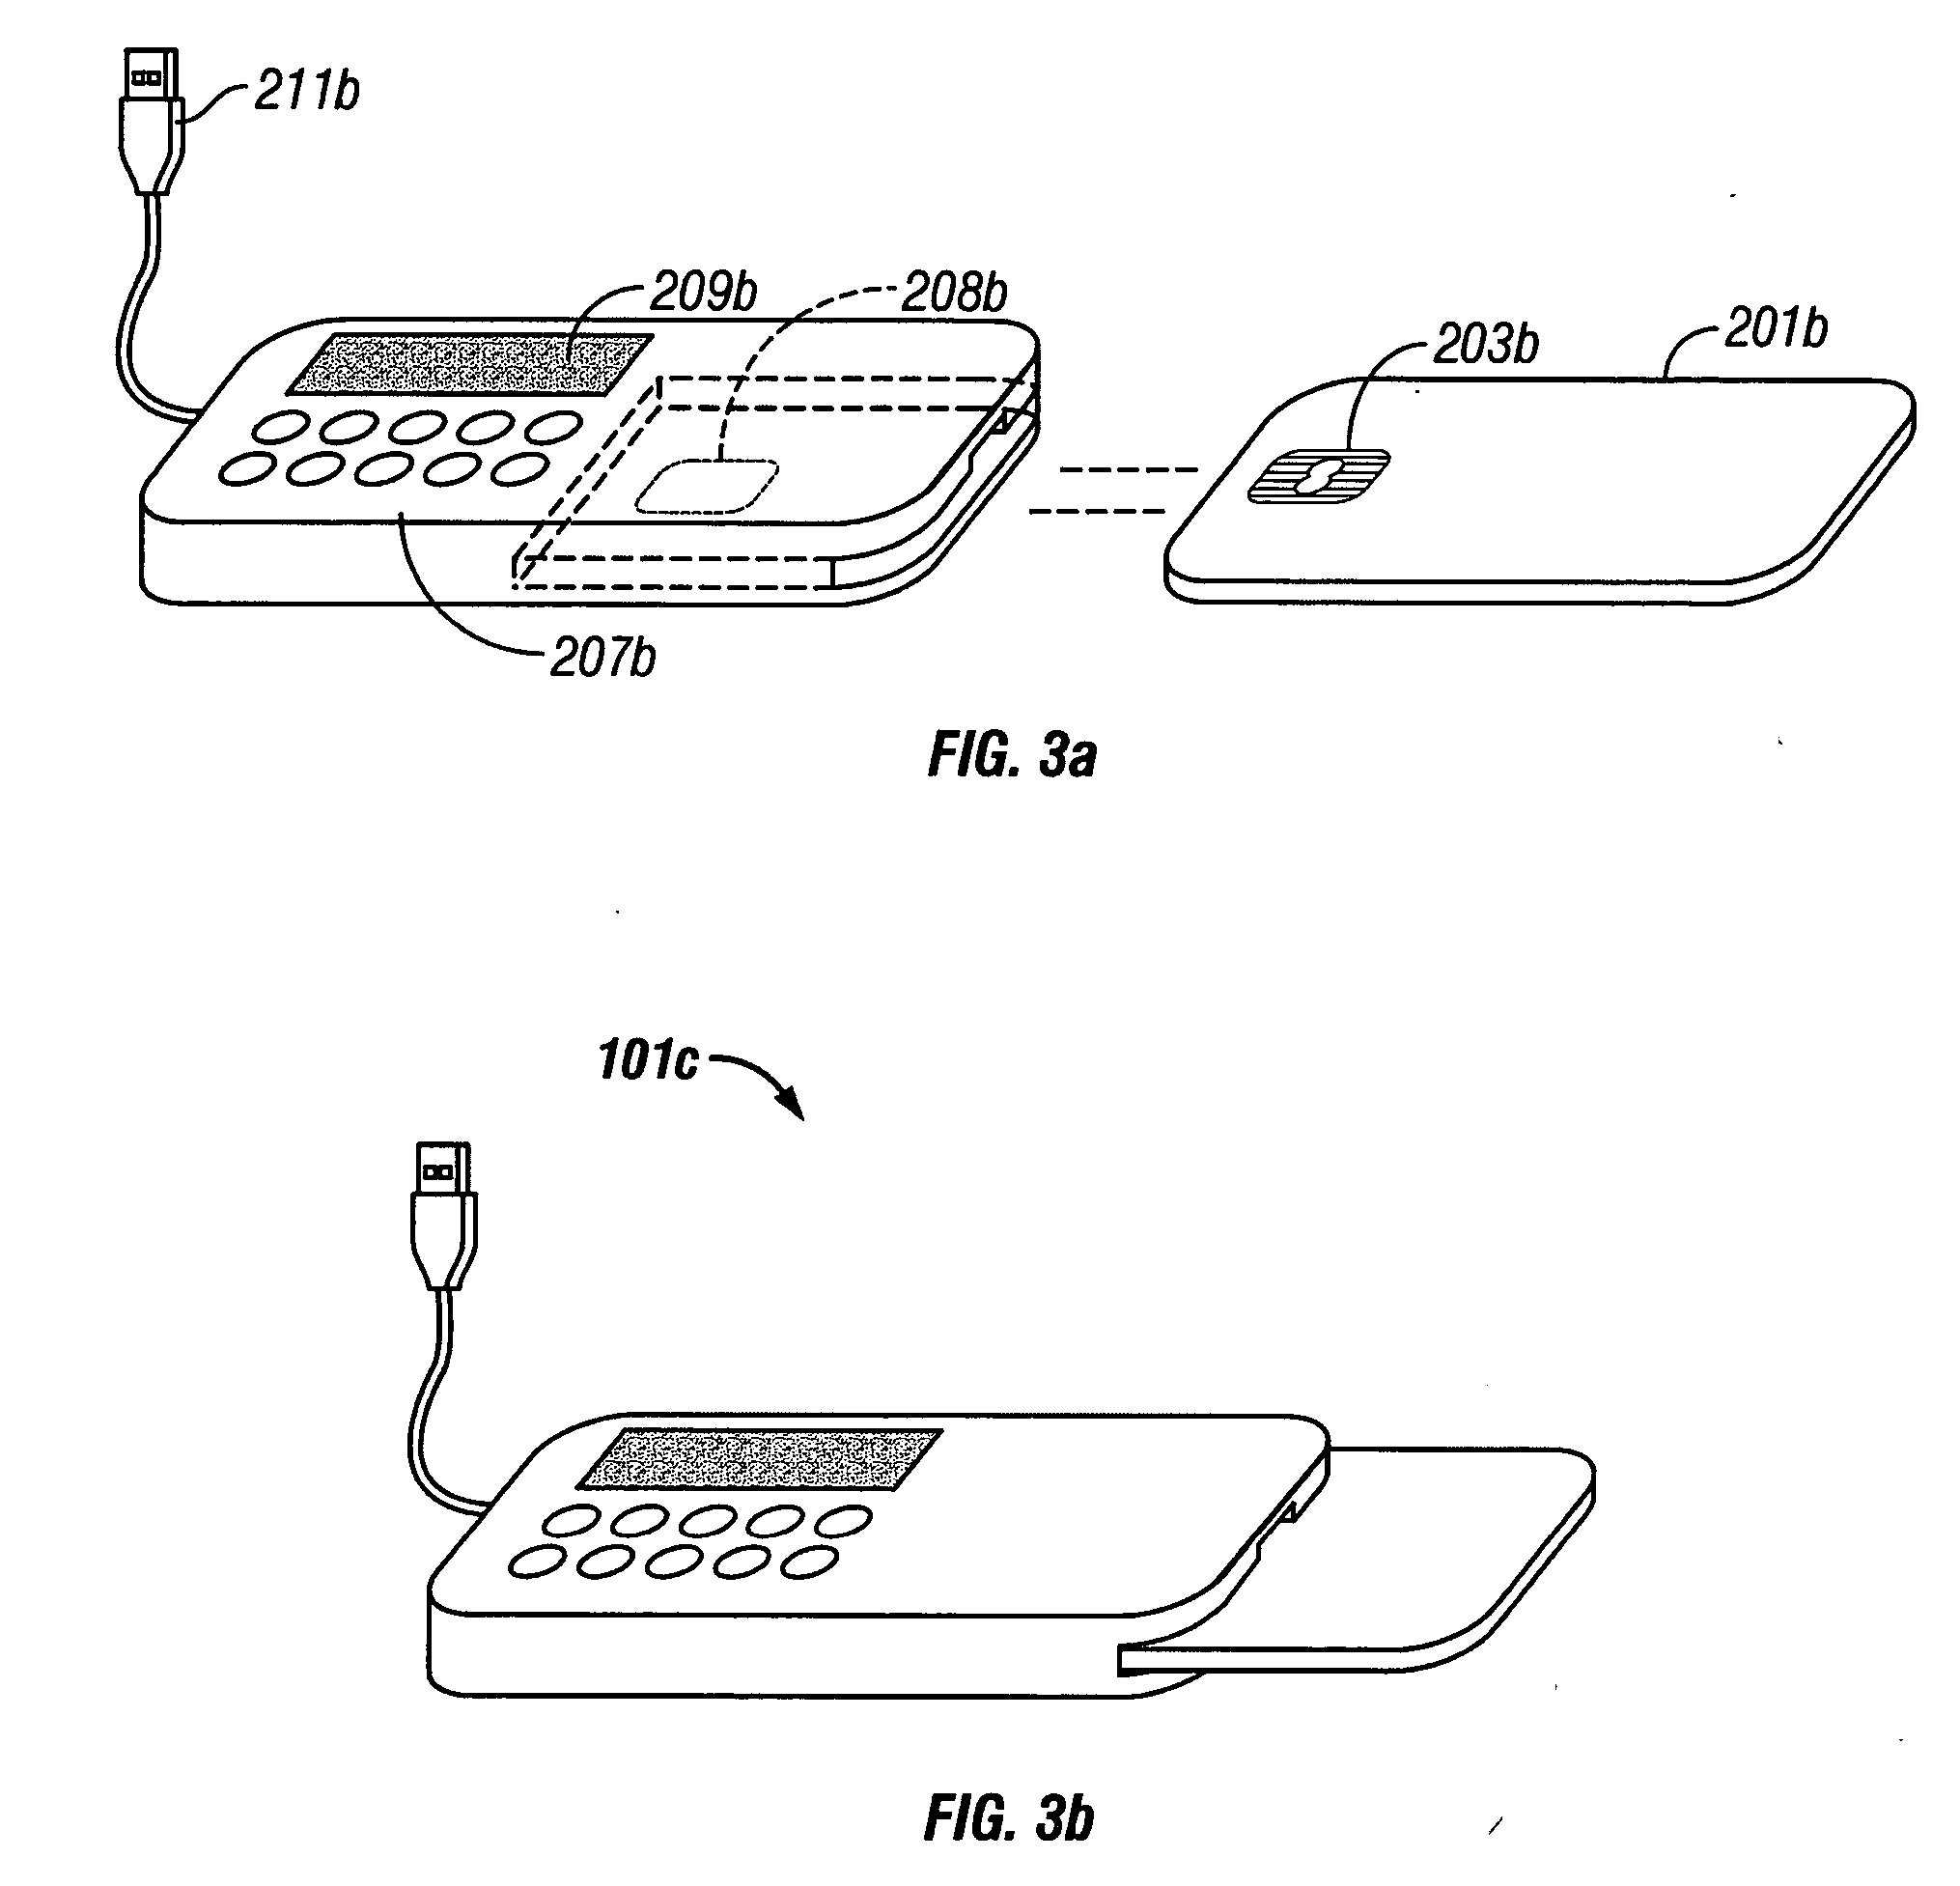 System and method for secure online transactions using portable secure network devices